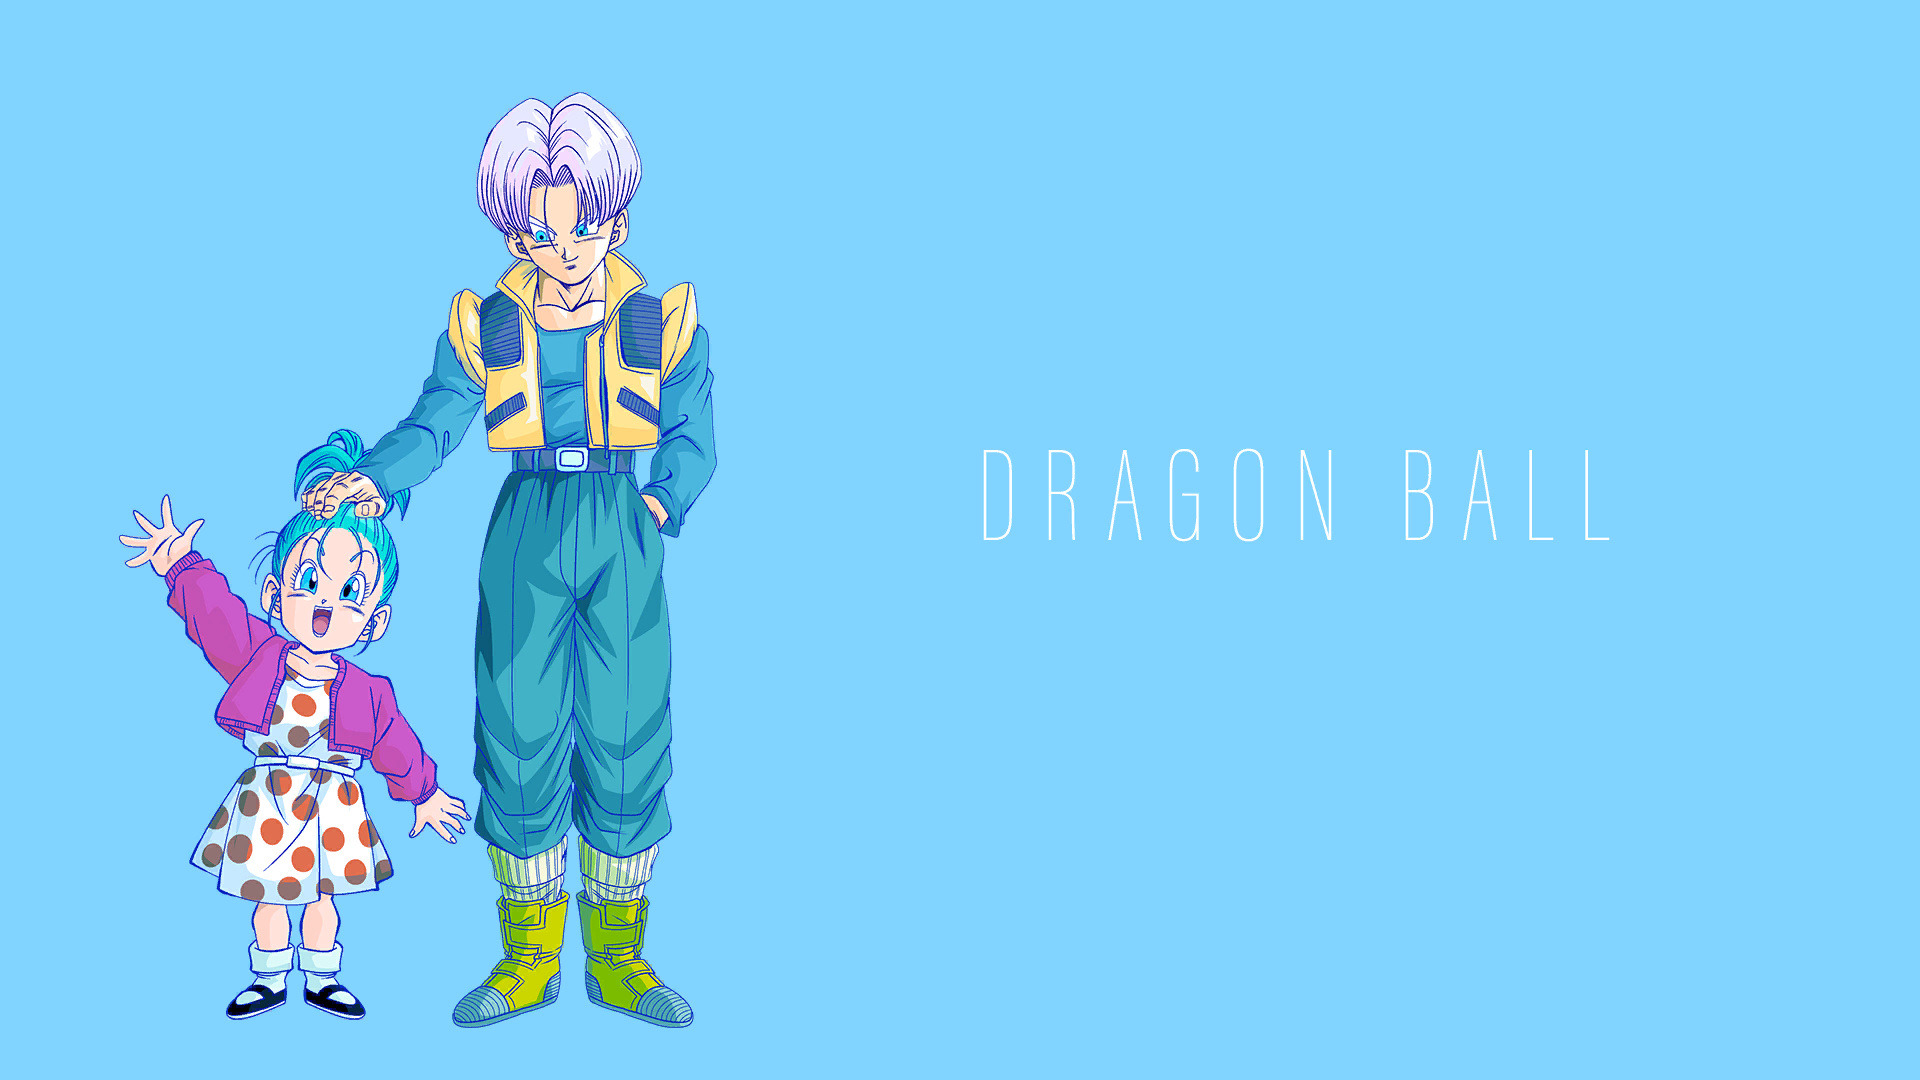 Dragon Ball Dragon Ball Z Dragon Ball Super Dragon Ball Xenoverse 2 Trunks Character 1920x1080